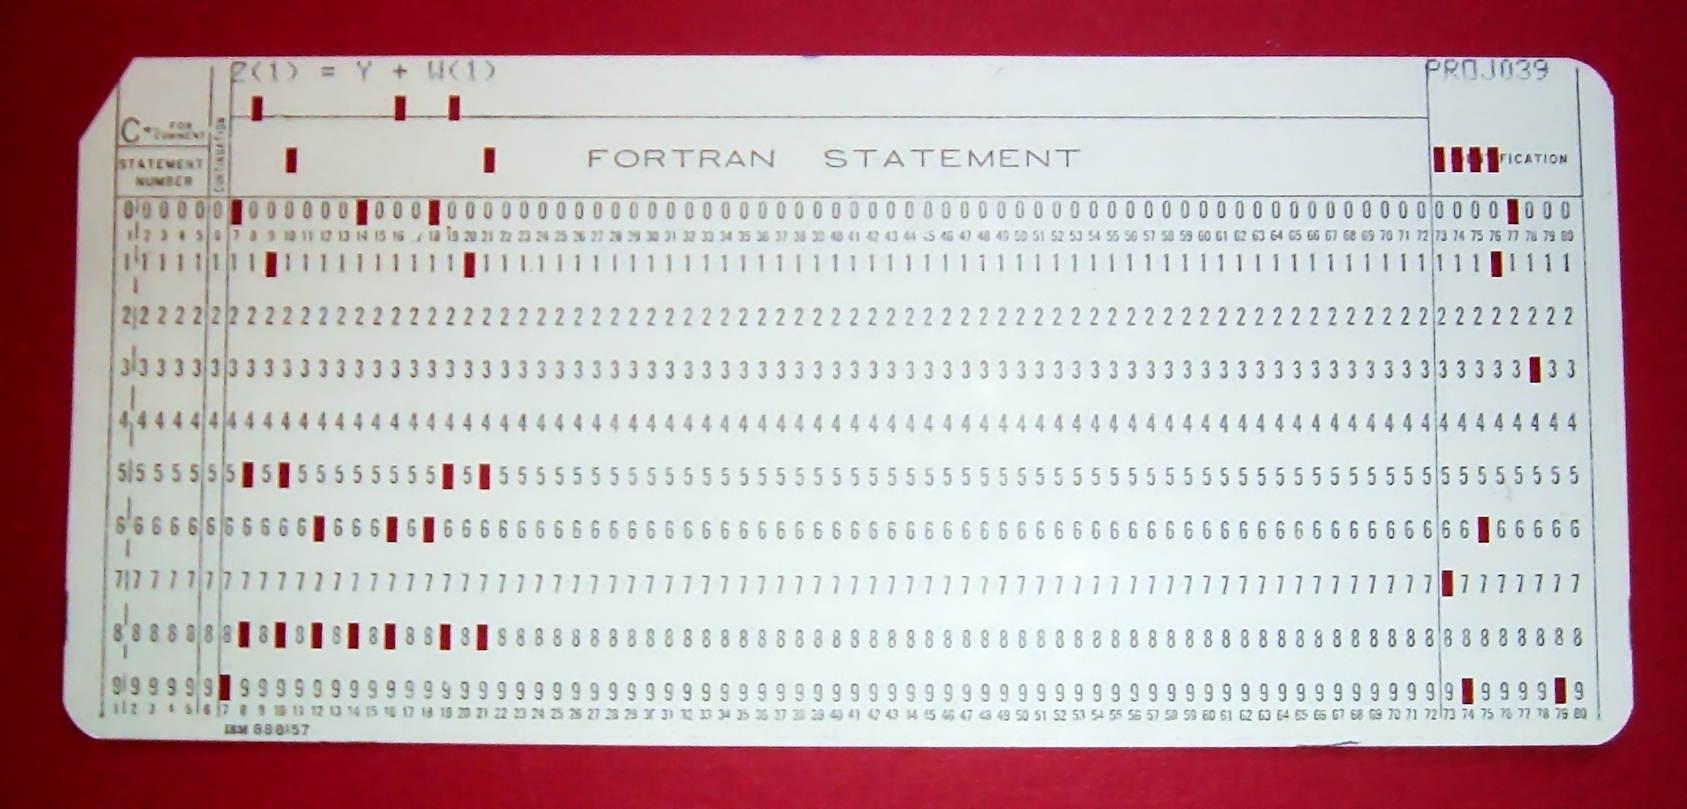 How to write if statements in fortran